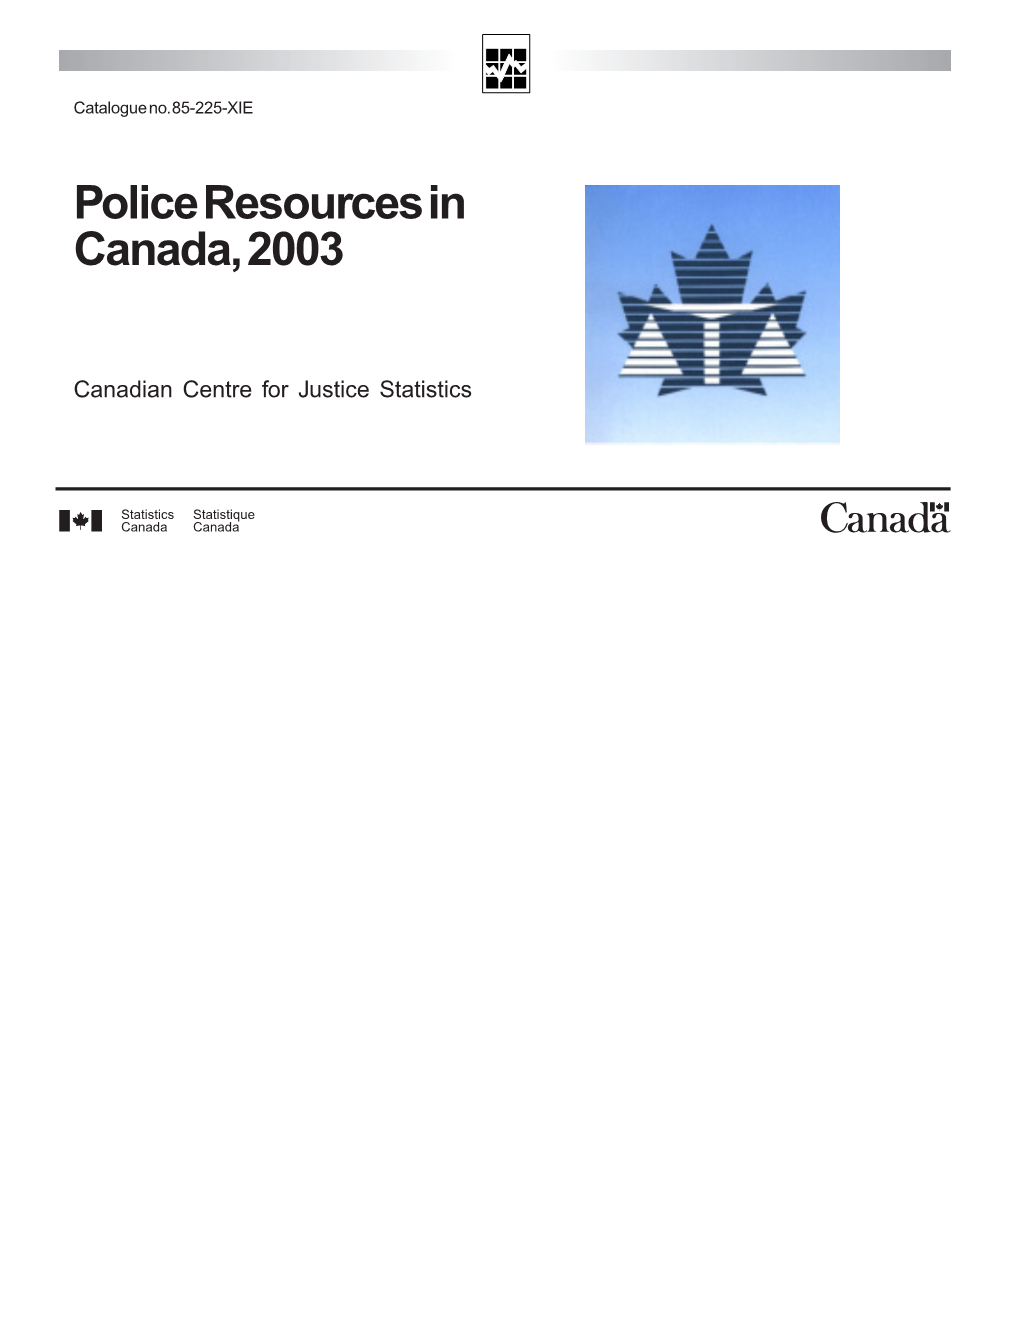 Police Resources in Canada, 2003